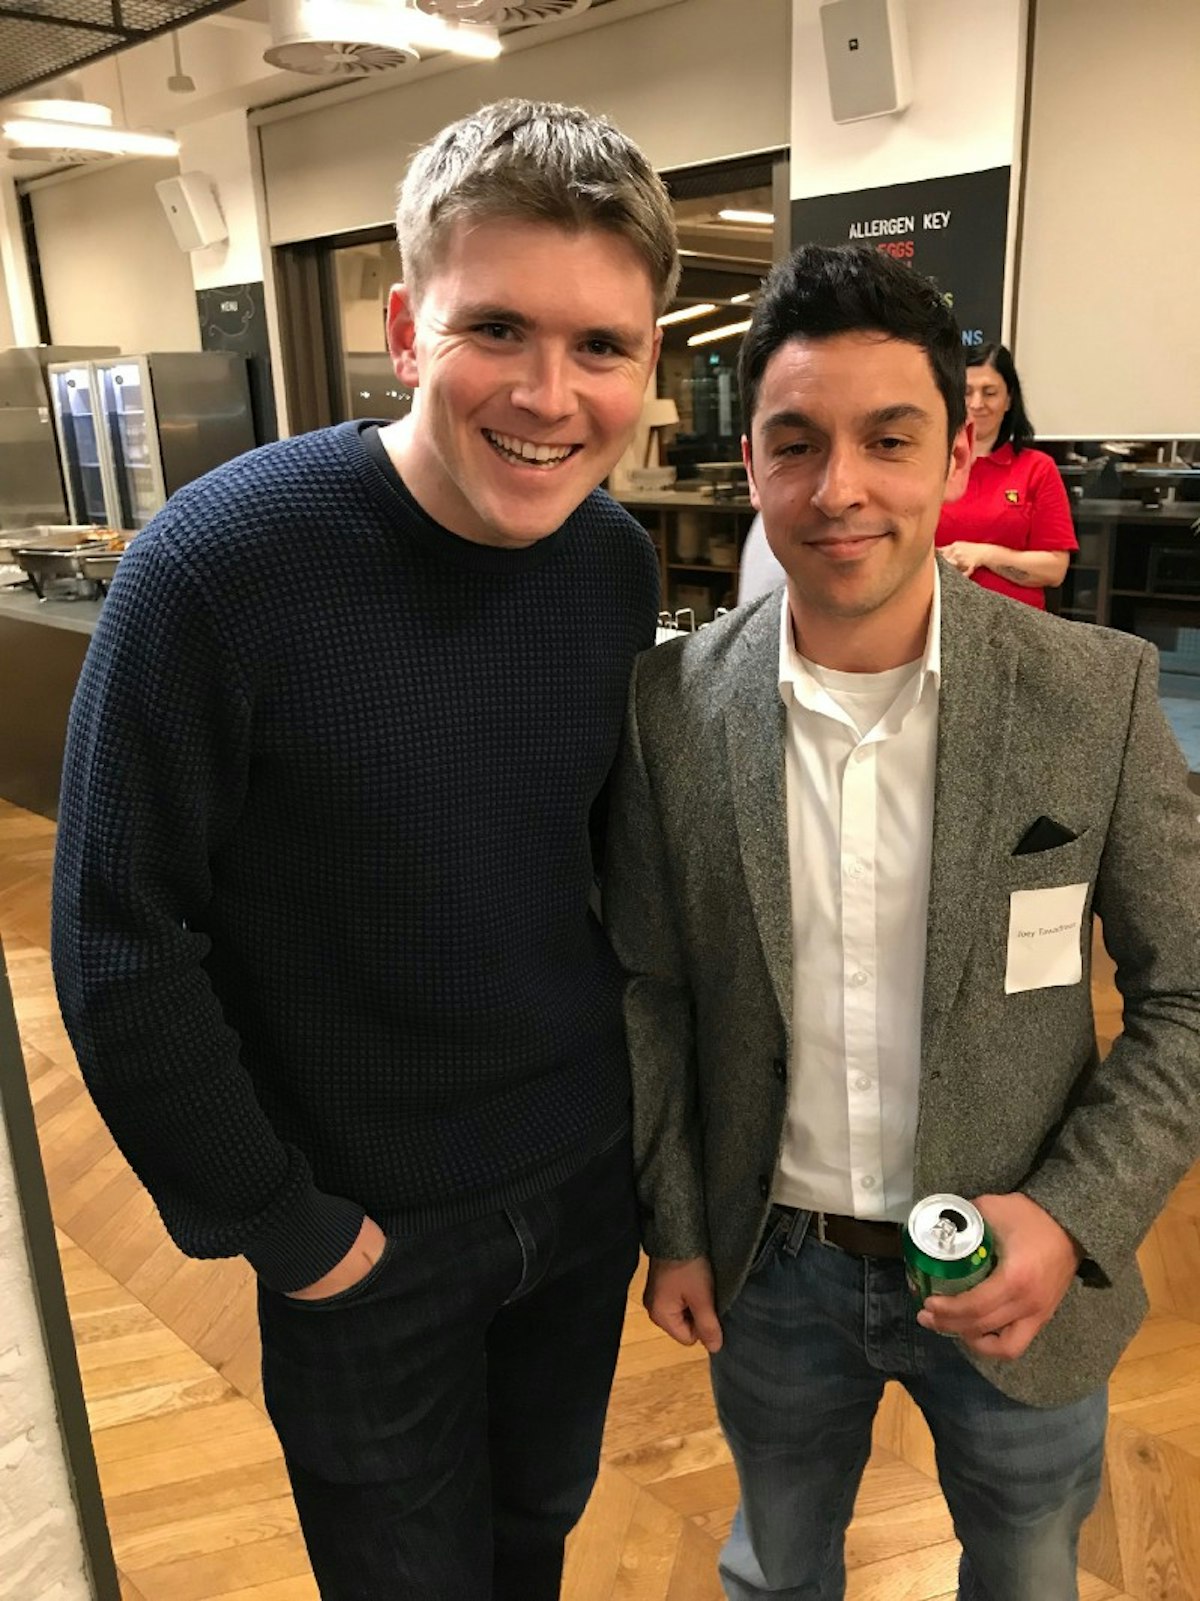 featured image - I met John Collison and Courtland Allen today — this is what I learned